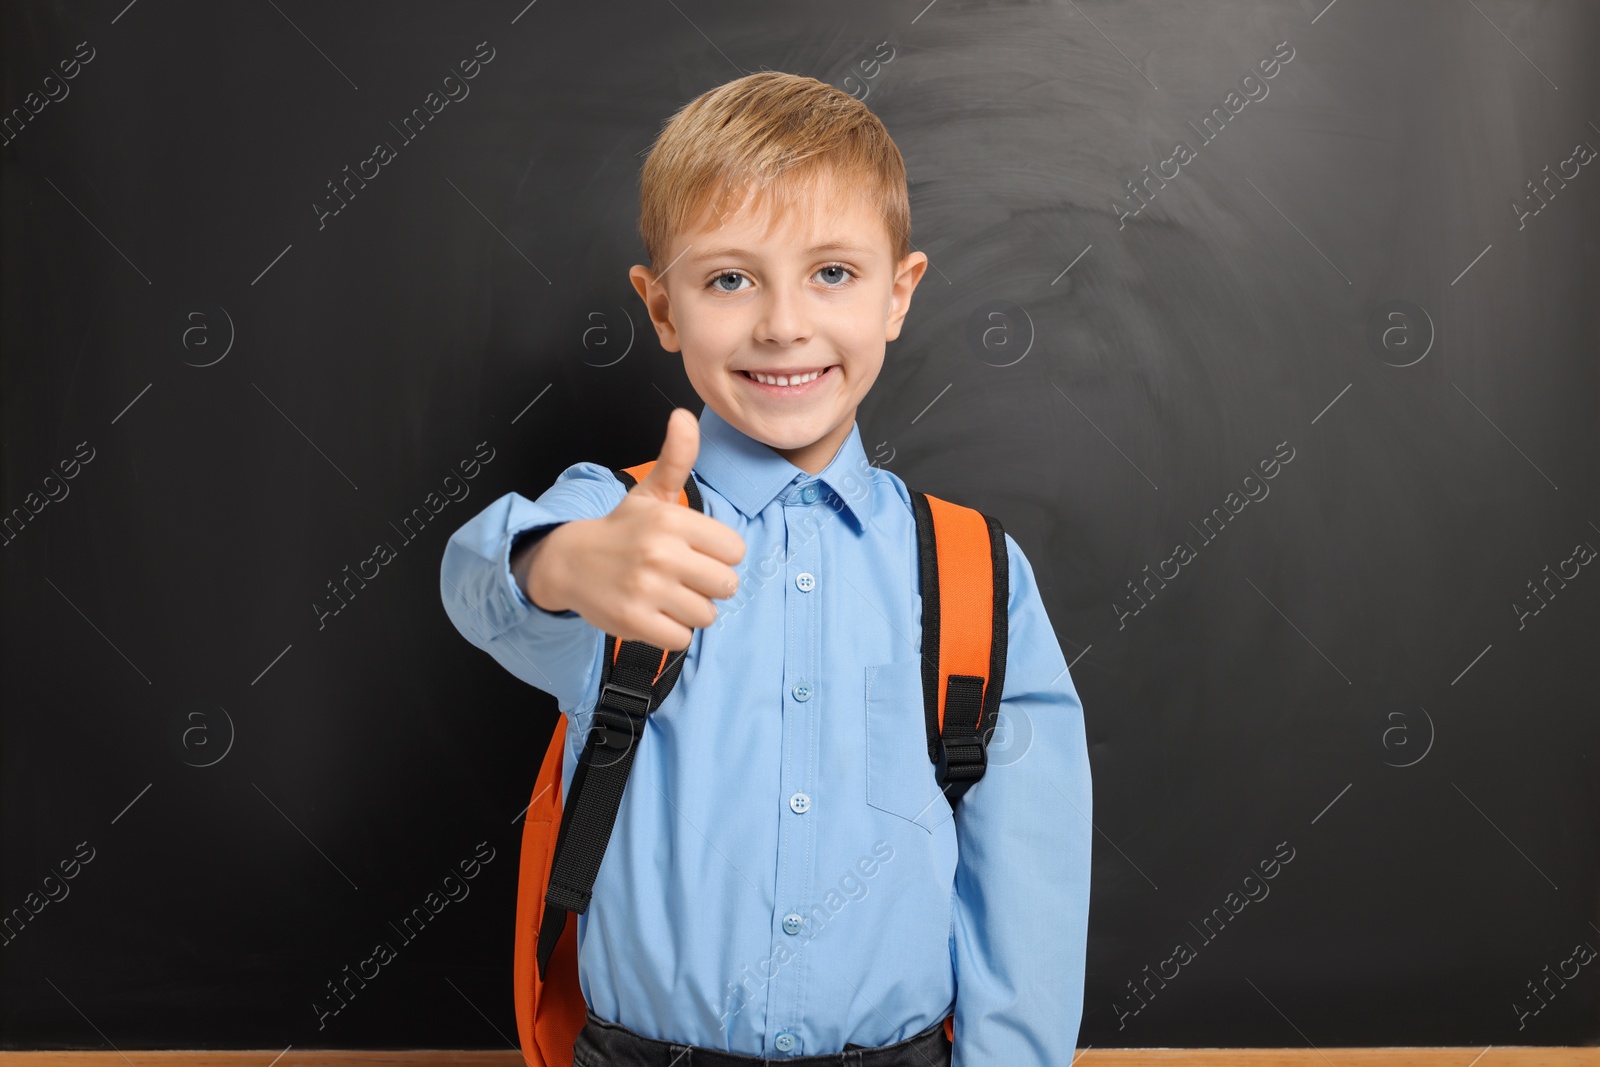 Photo of Happy schoolboy with backpack showing thumb up gesture near blackboard